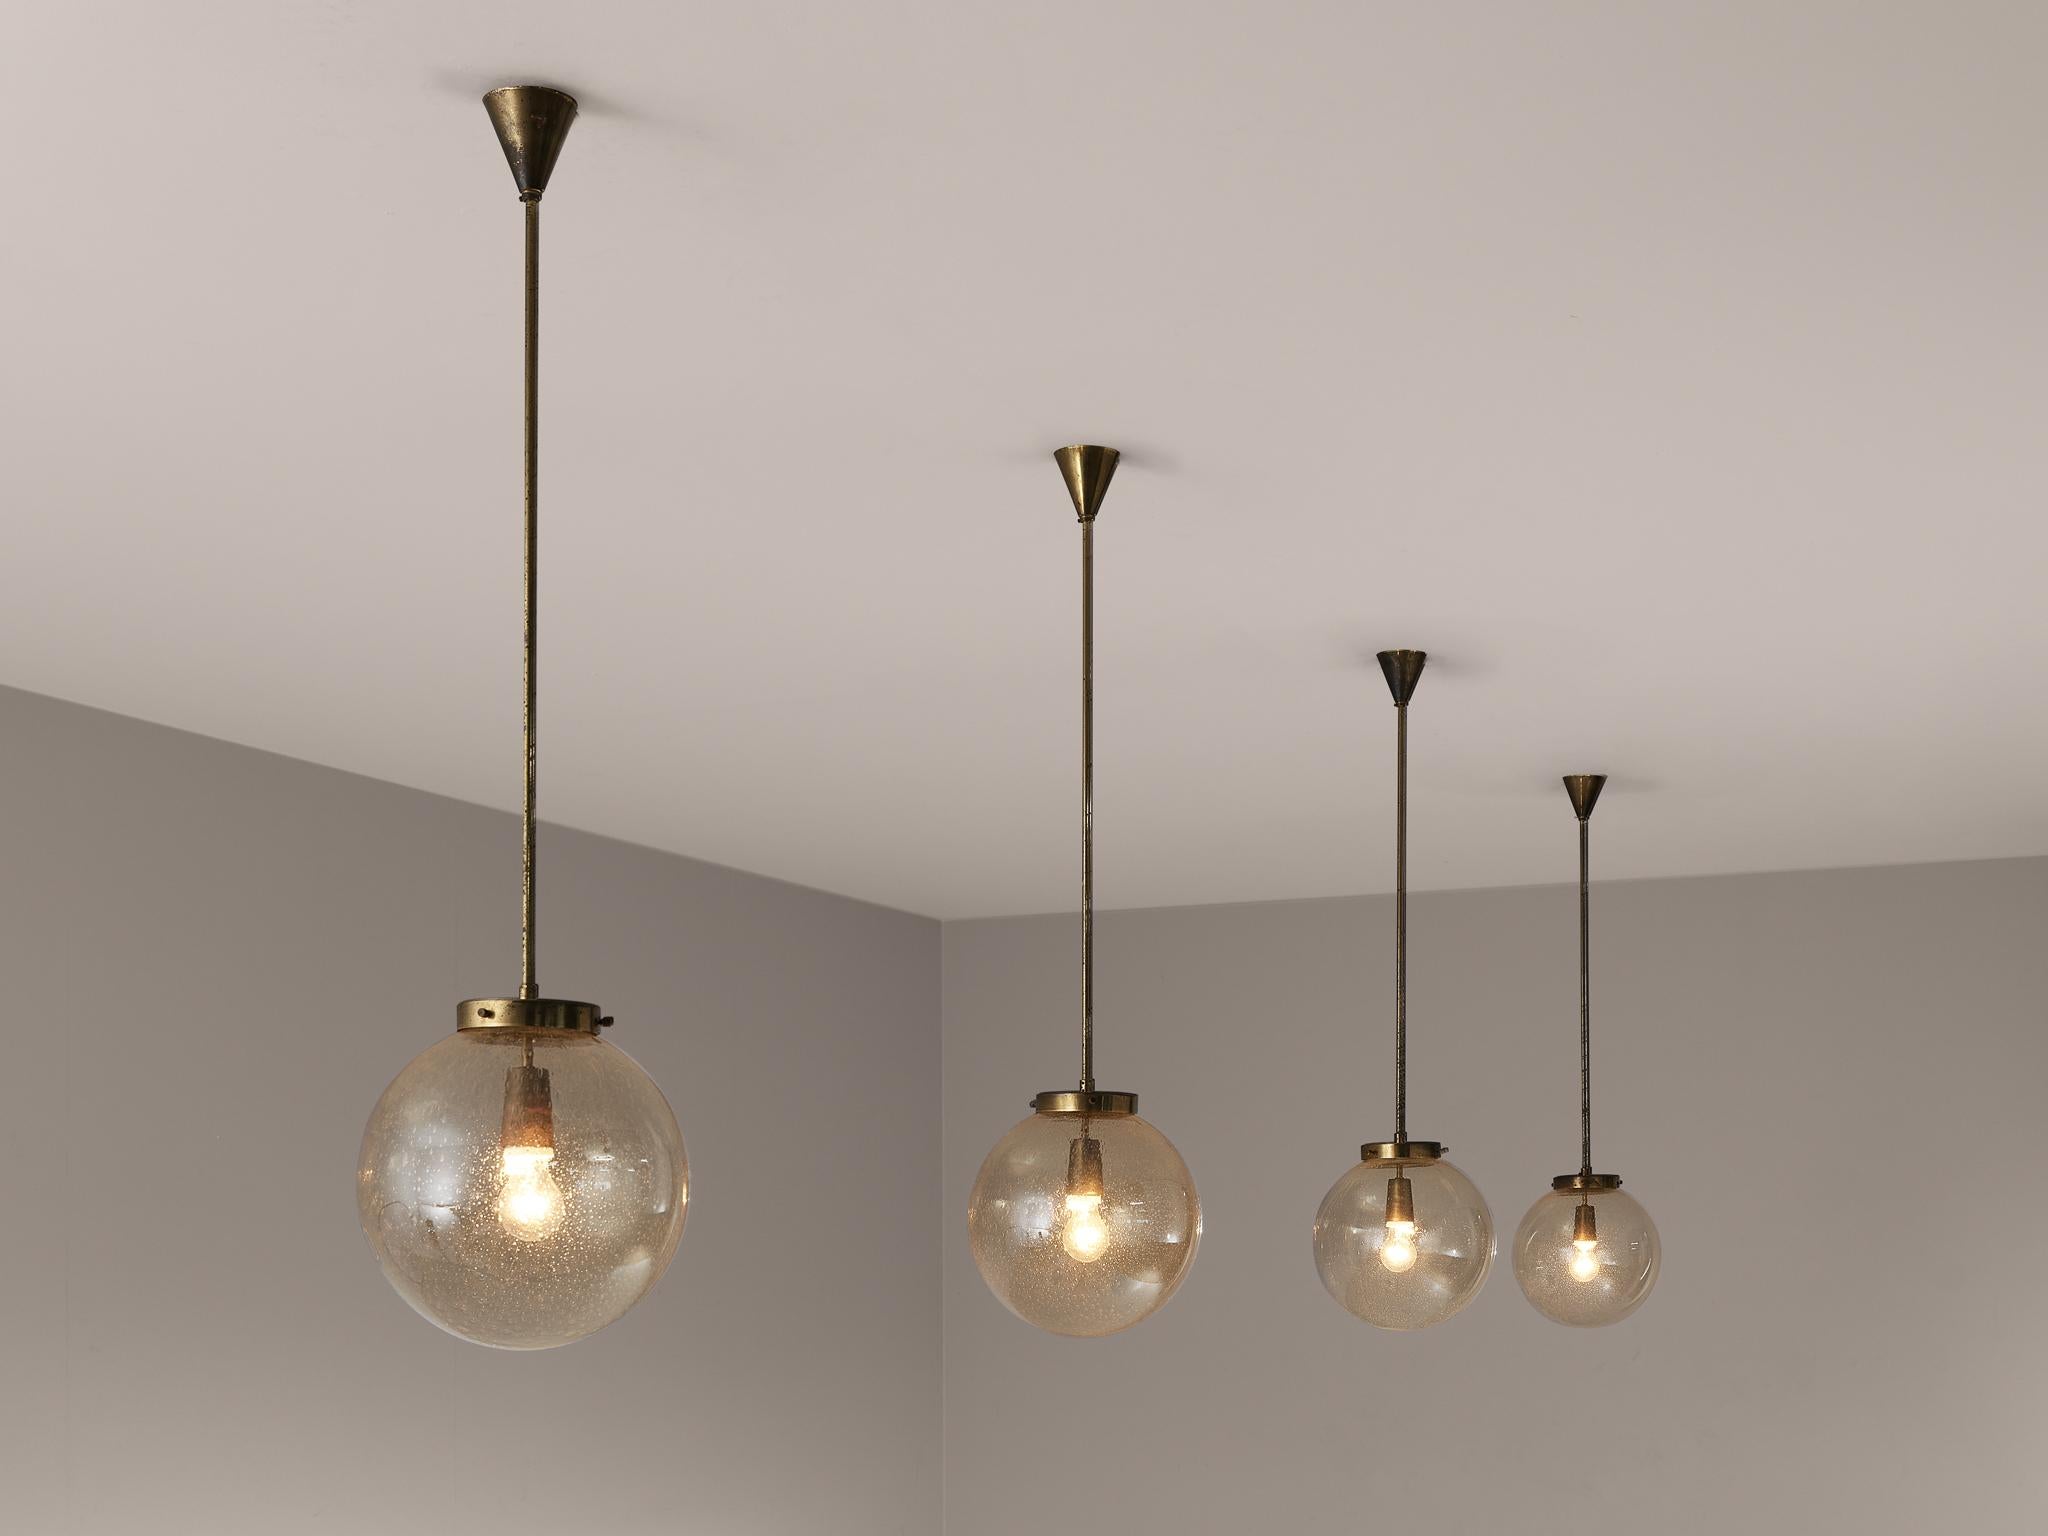 Pendants, glass, brass, Germany, 1960s.

This set of pendants features a smoked glass orb with multiple bubbles. It not only gives the shade a playful appearance, it also creates a sparkling light partition. The brass pendant holder suits perfectly